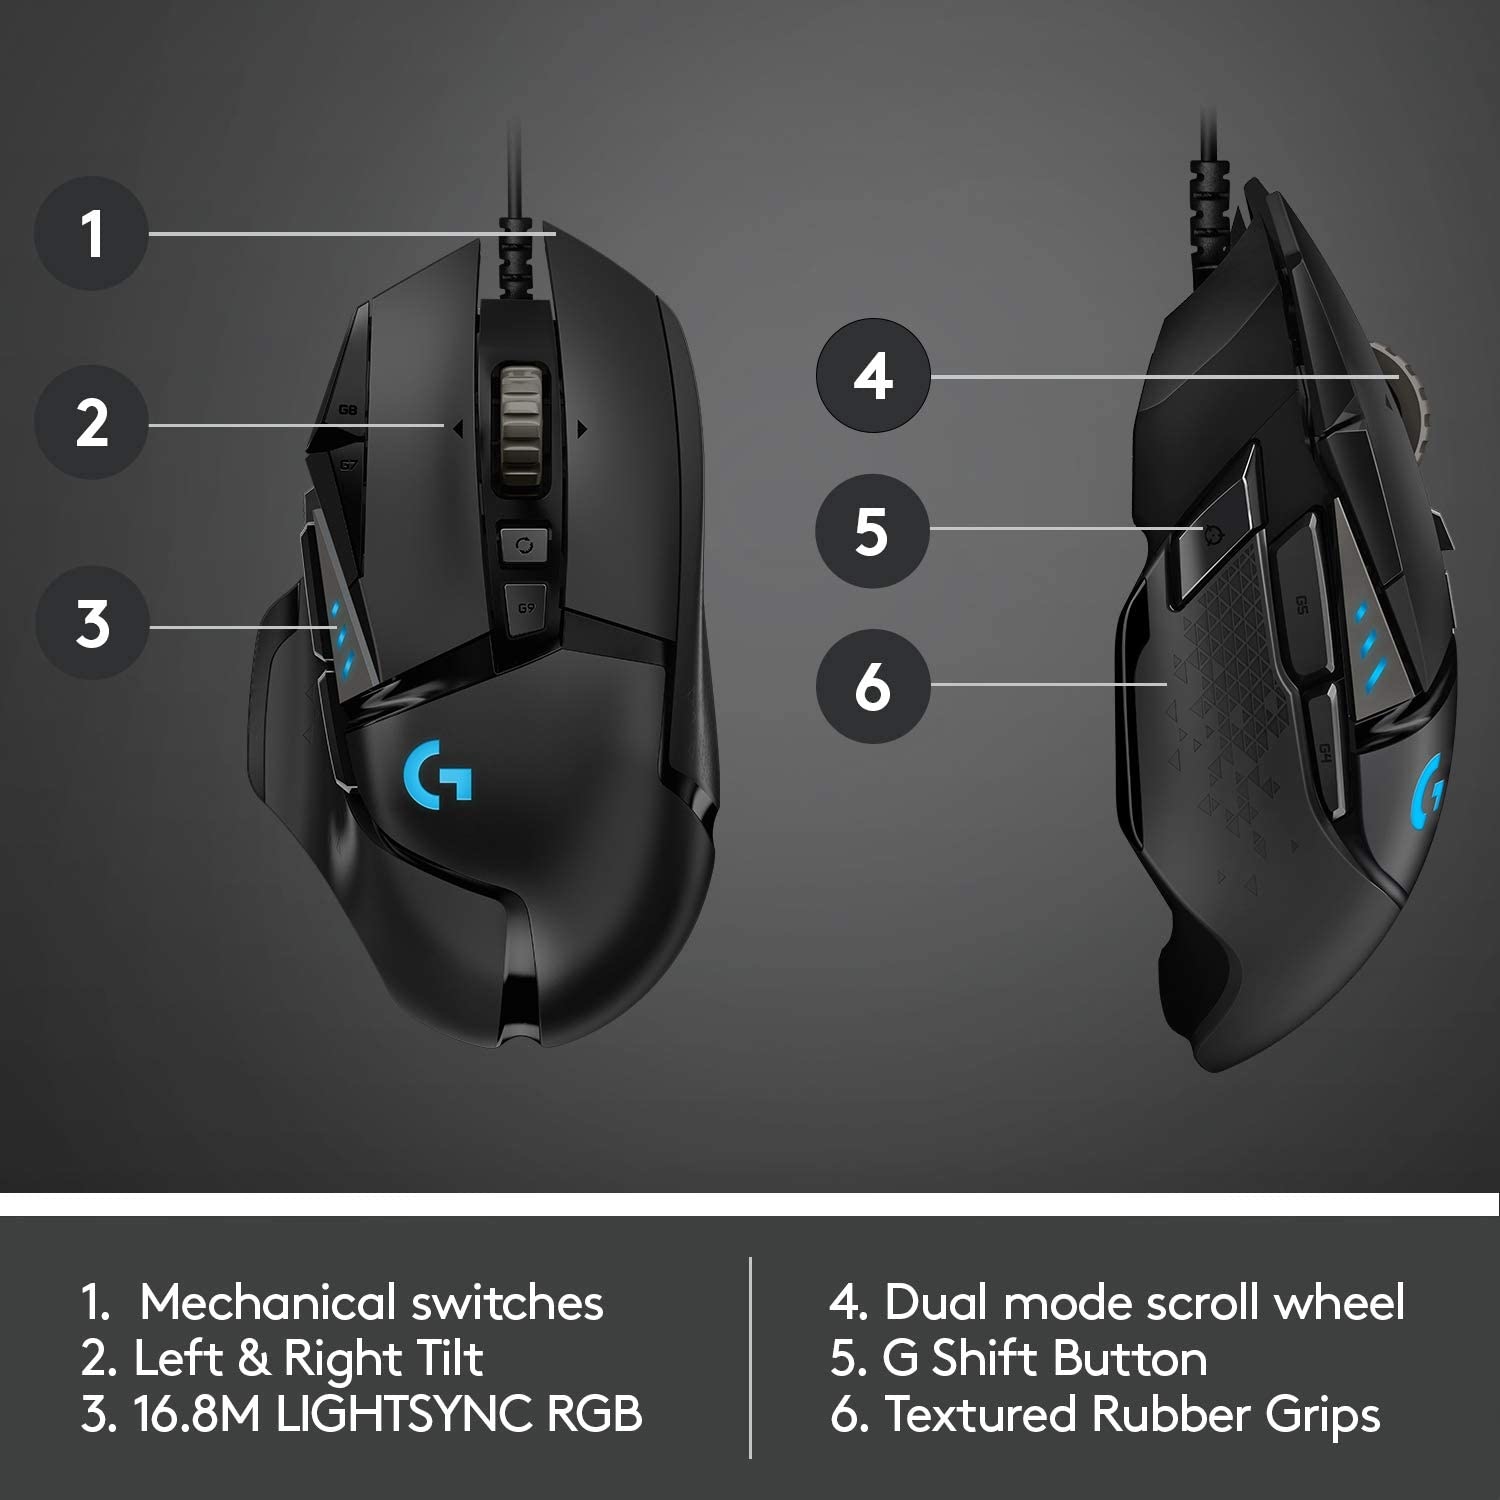 Logitech G502 Proteus Spectrum RGB Tunable Gaming Mouse, 12,000 DPI  On-The-Fly DPI Shifting, Personalized Weight and Balance Tuning with (5)  3.6g Weights, 11 Programmable Buttons 